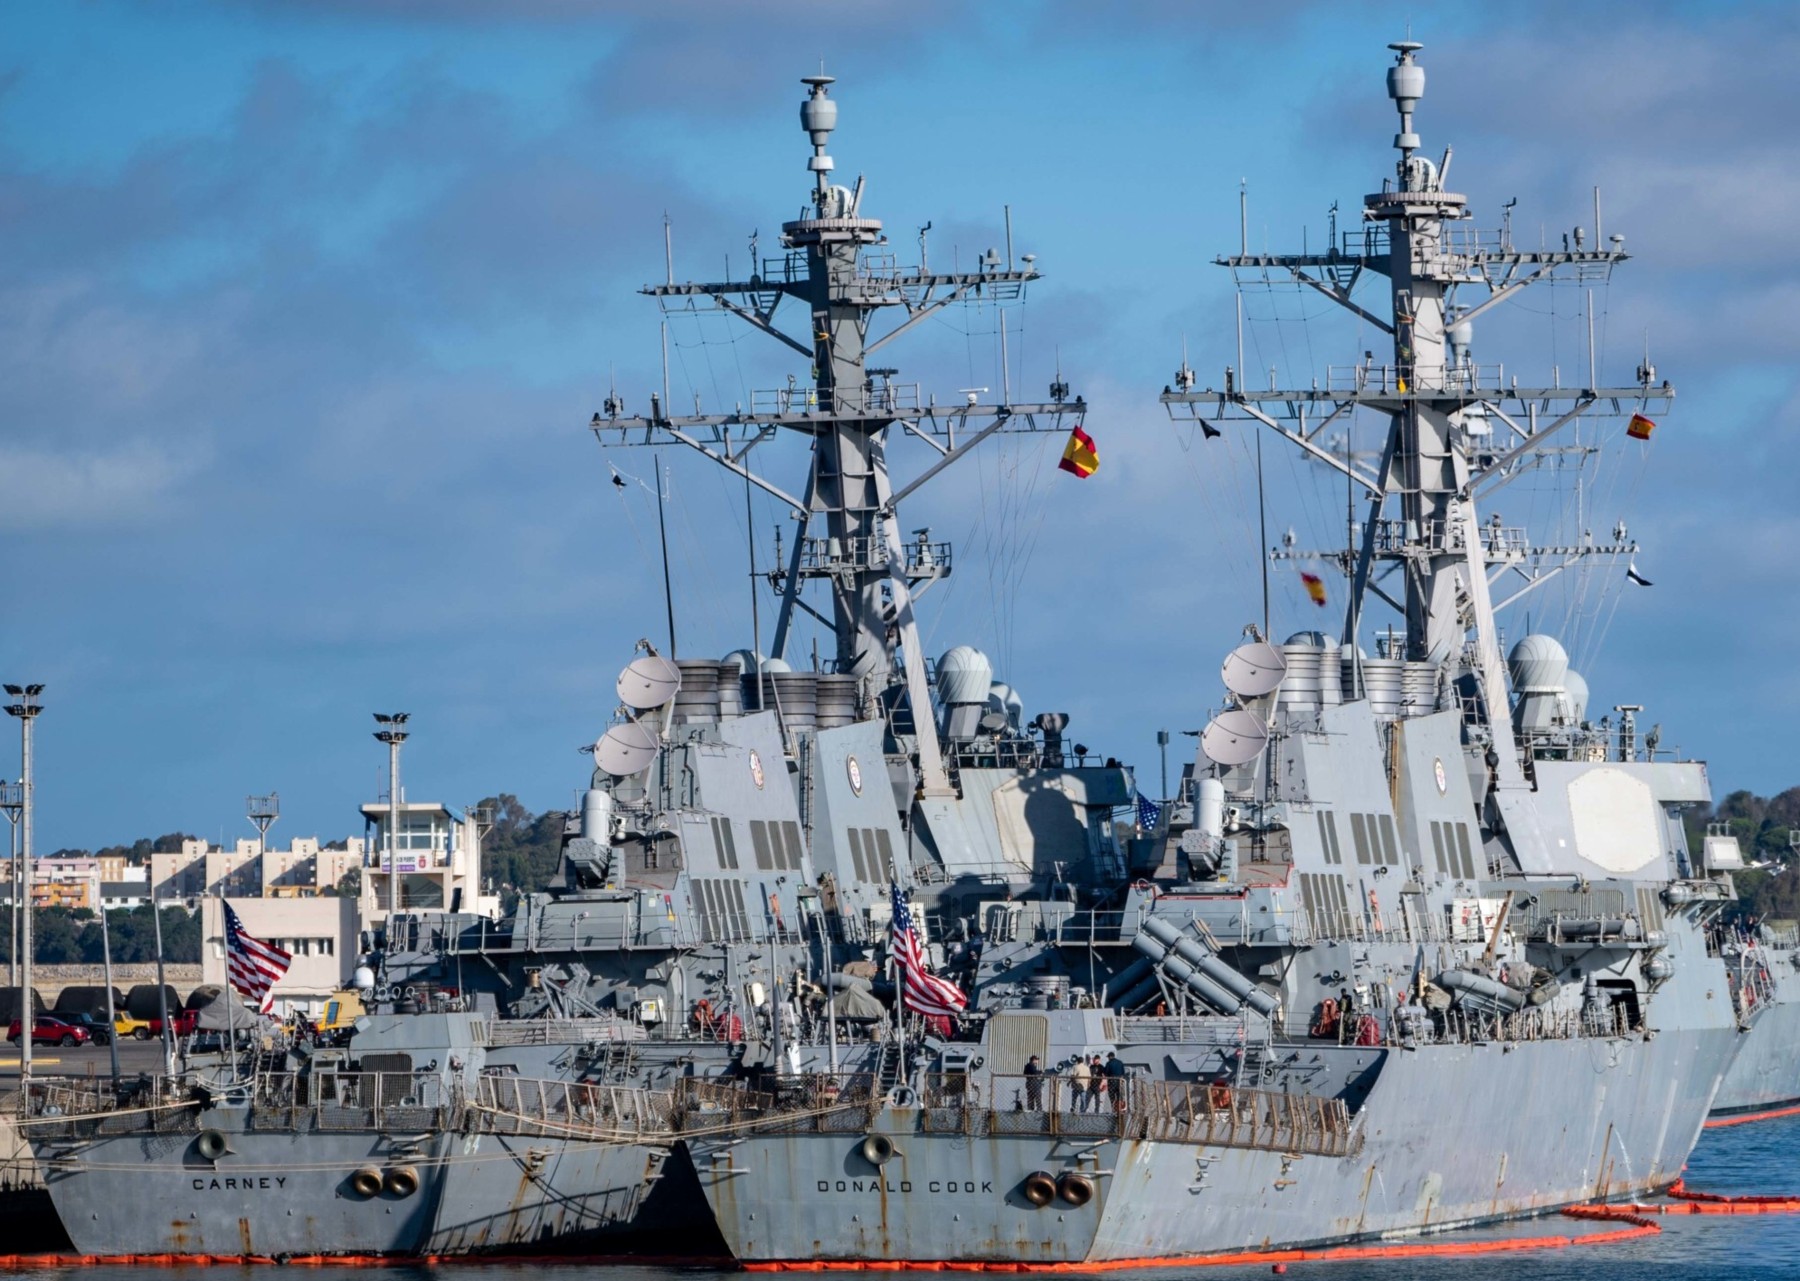 ddg-64 uss carney guided missile destroyer arleigh burke class 103 naval station rota spain